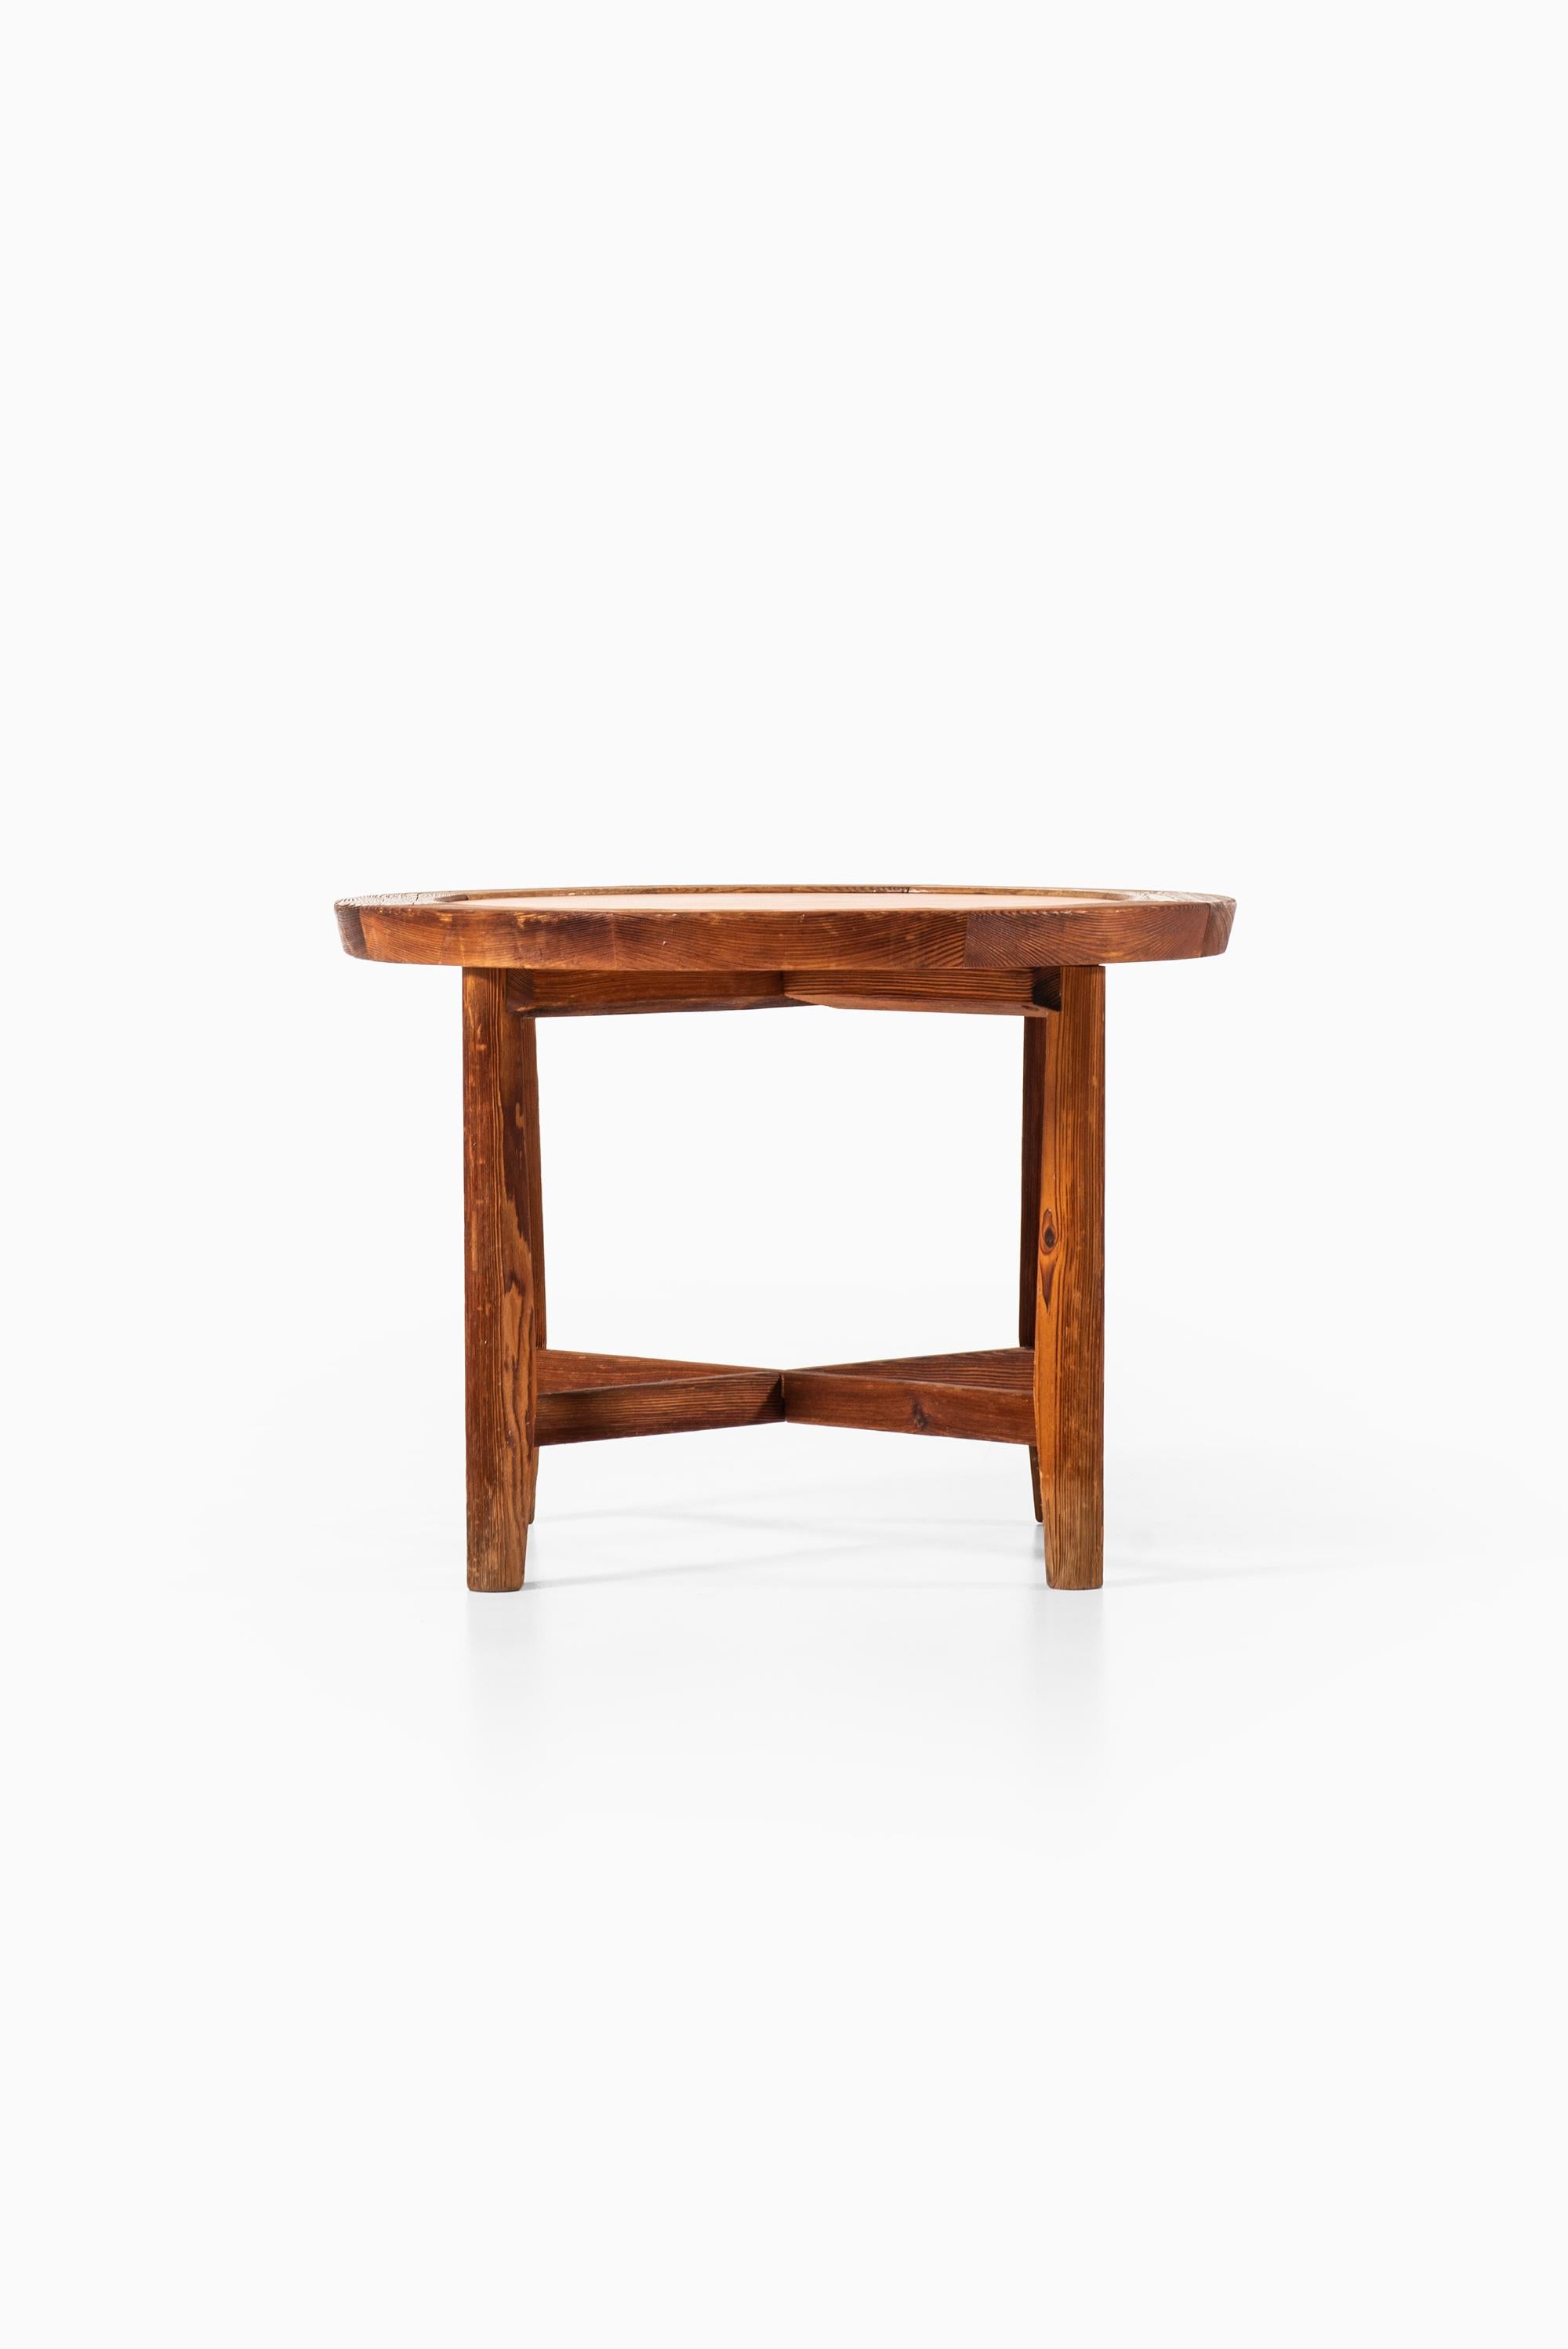 Swedish Side Table in the Manner of Axel Einar Hjorth Produced in Sweden For Sale